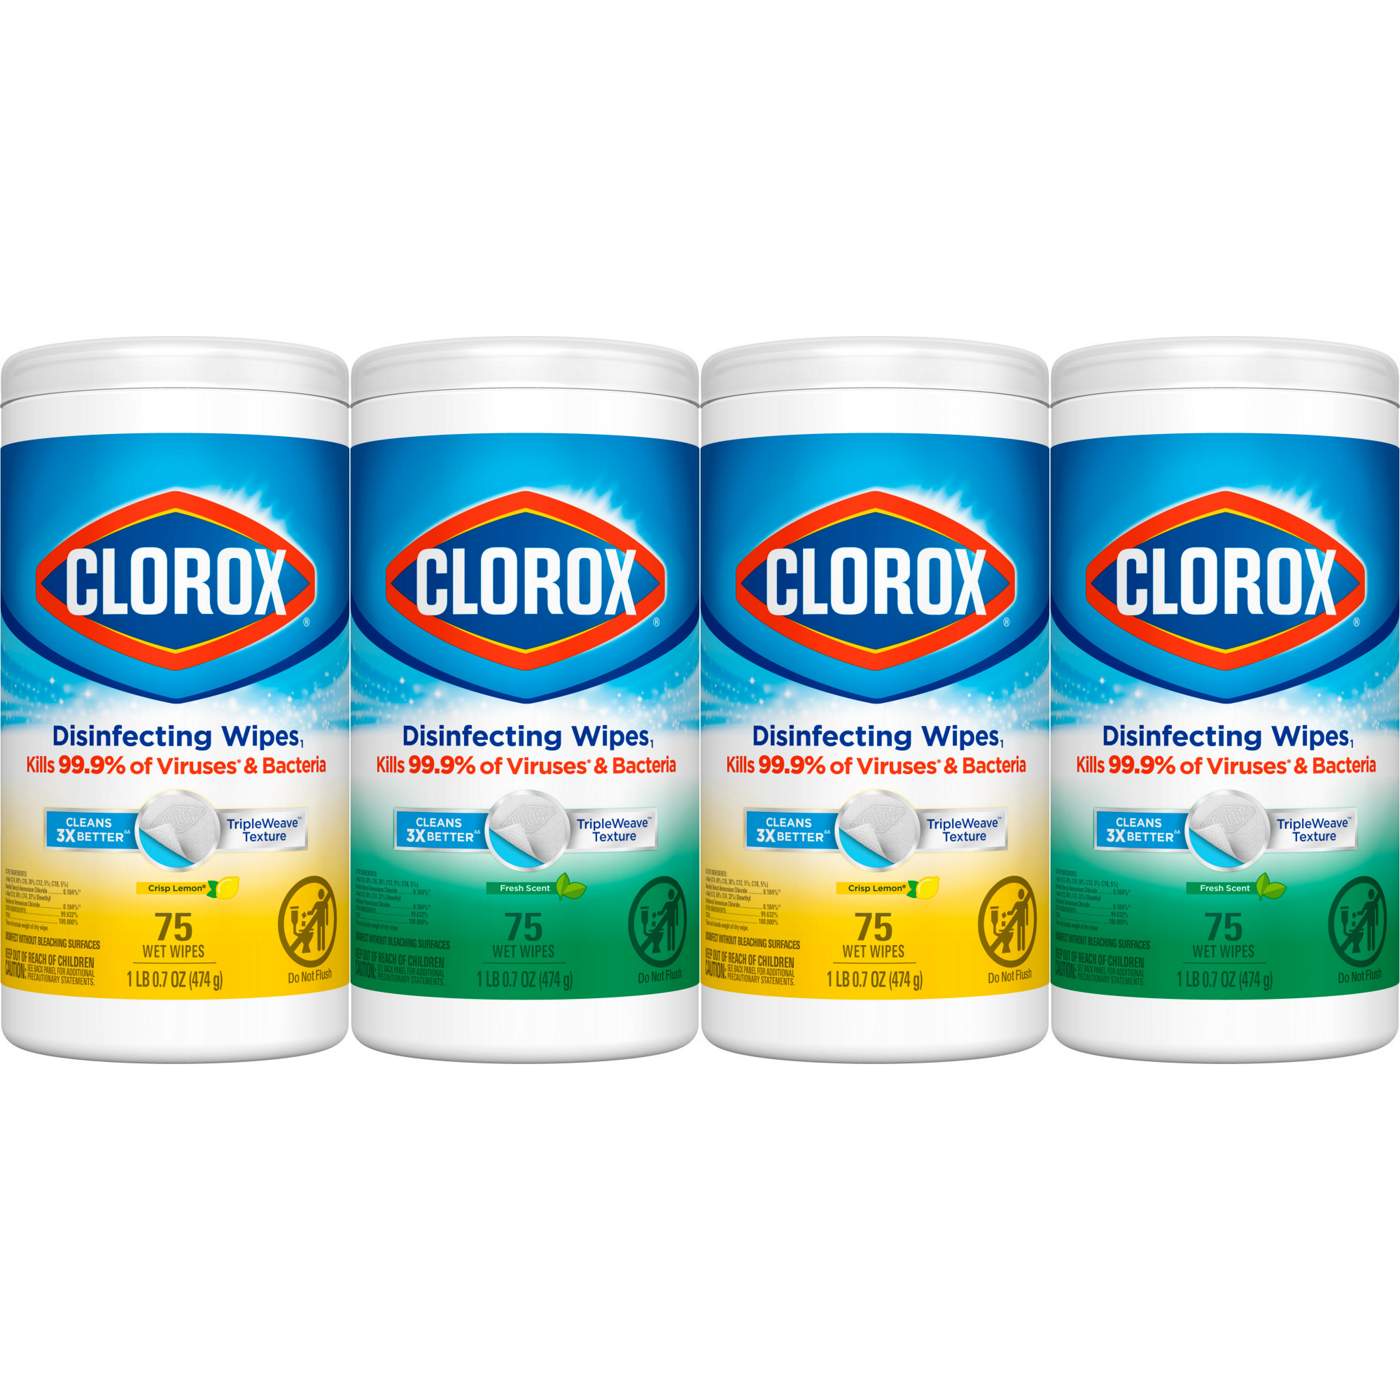 Clorox Disinfecting Wipes Value 4 Pack - Bleach Free Cleaning Wipes; image 7 of 9